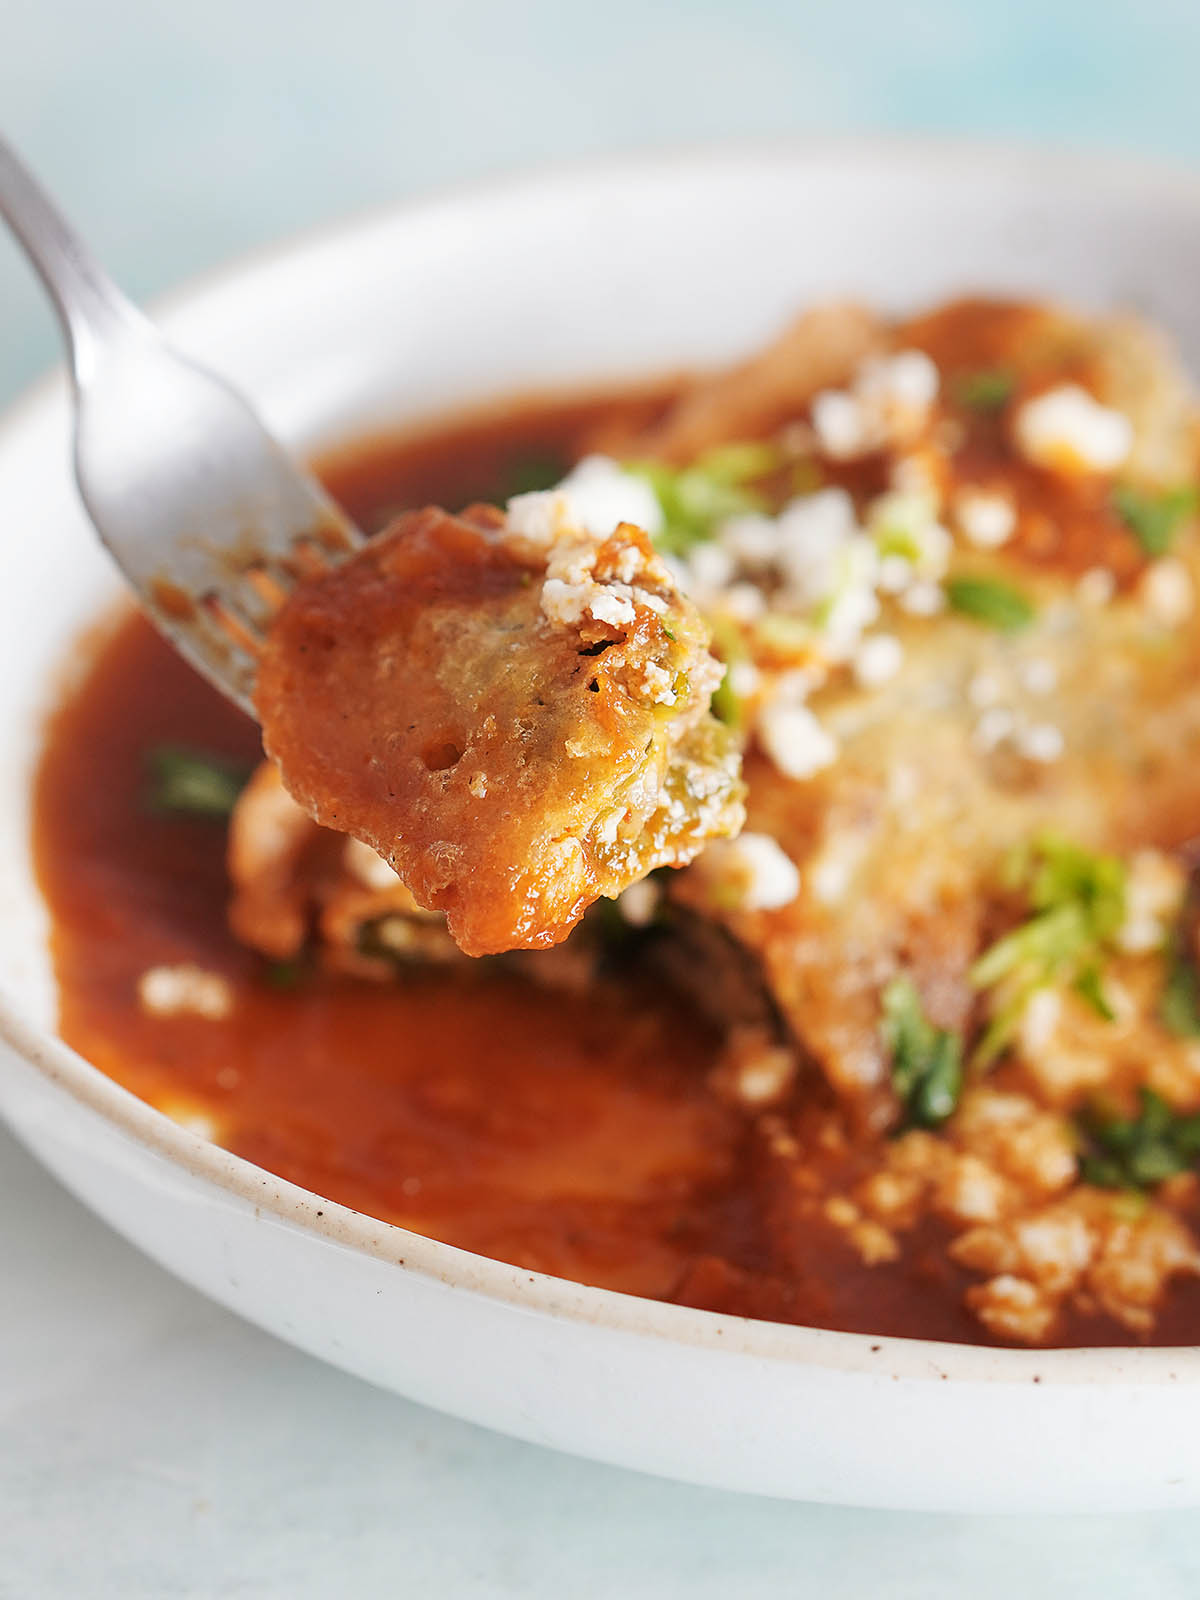 A fork holding a slice of chile relleno.